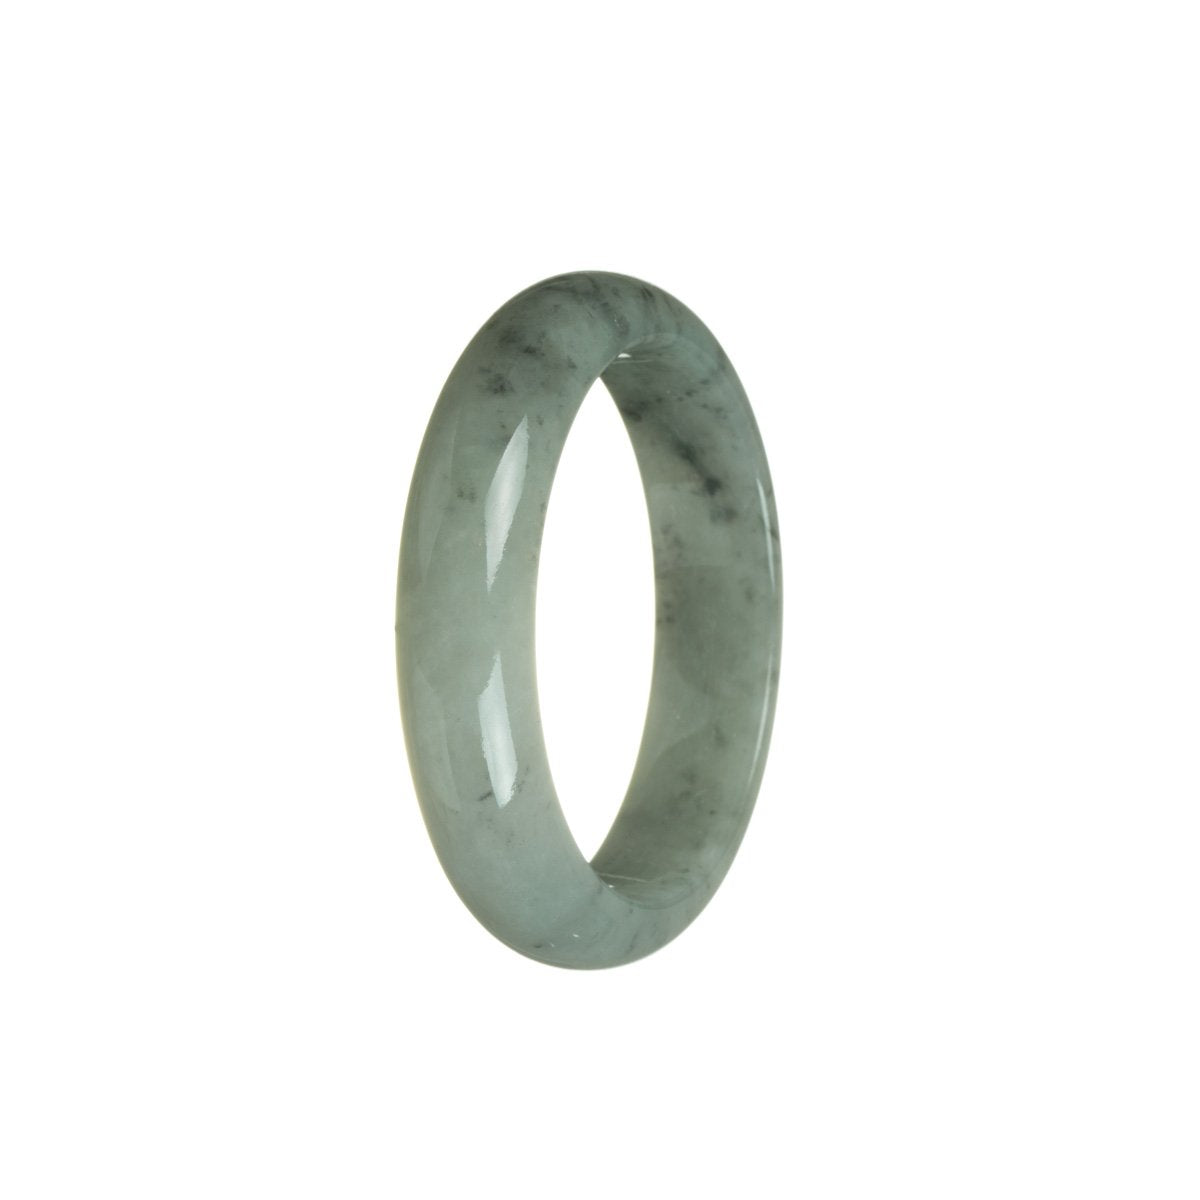 A close-up image of a beautiful bracelet made from authentic natural green and grey Burma jade. The bracelet features a 52mm half-moon shape.